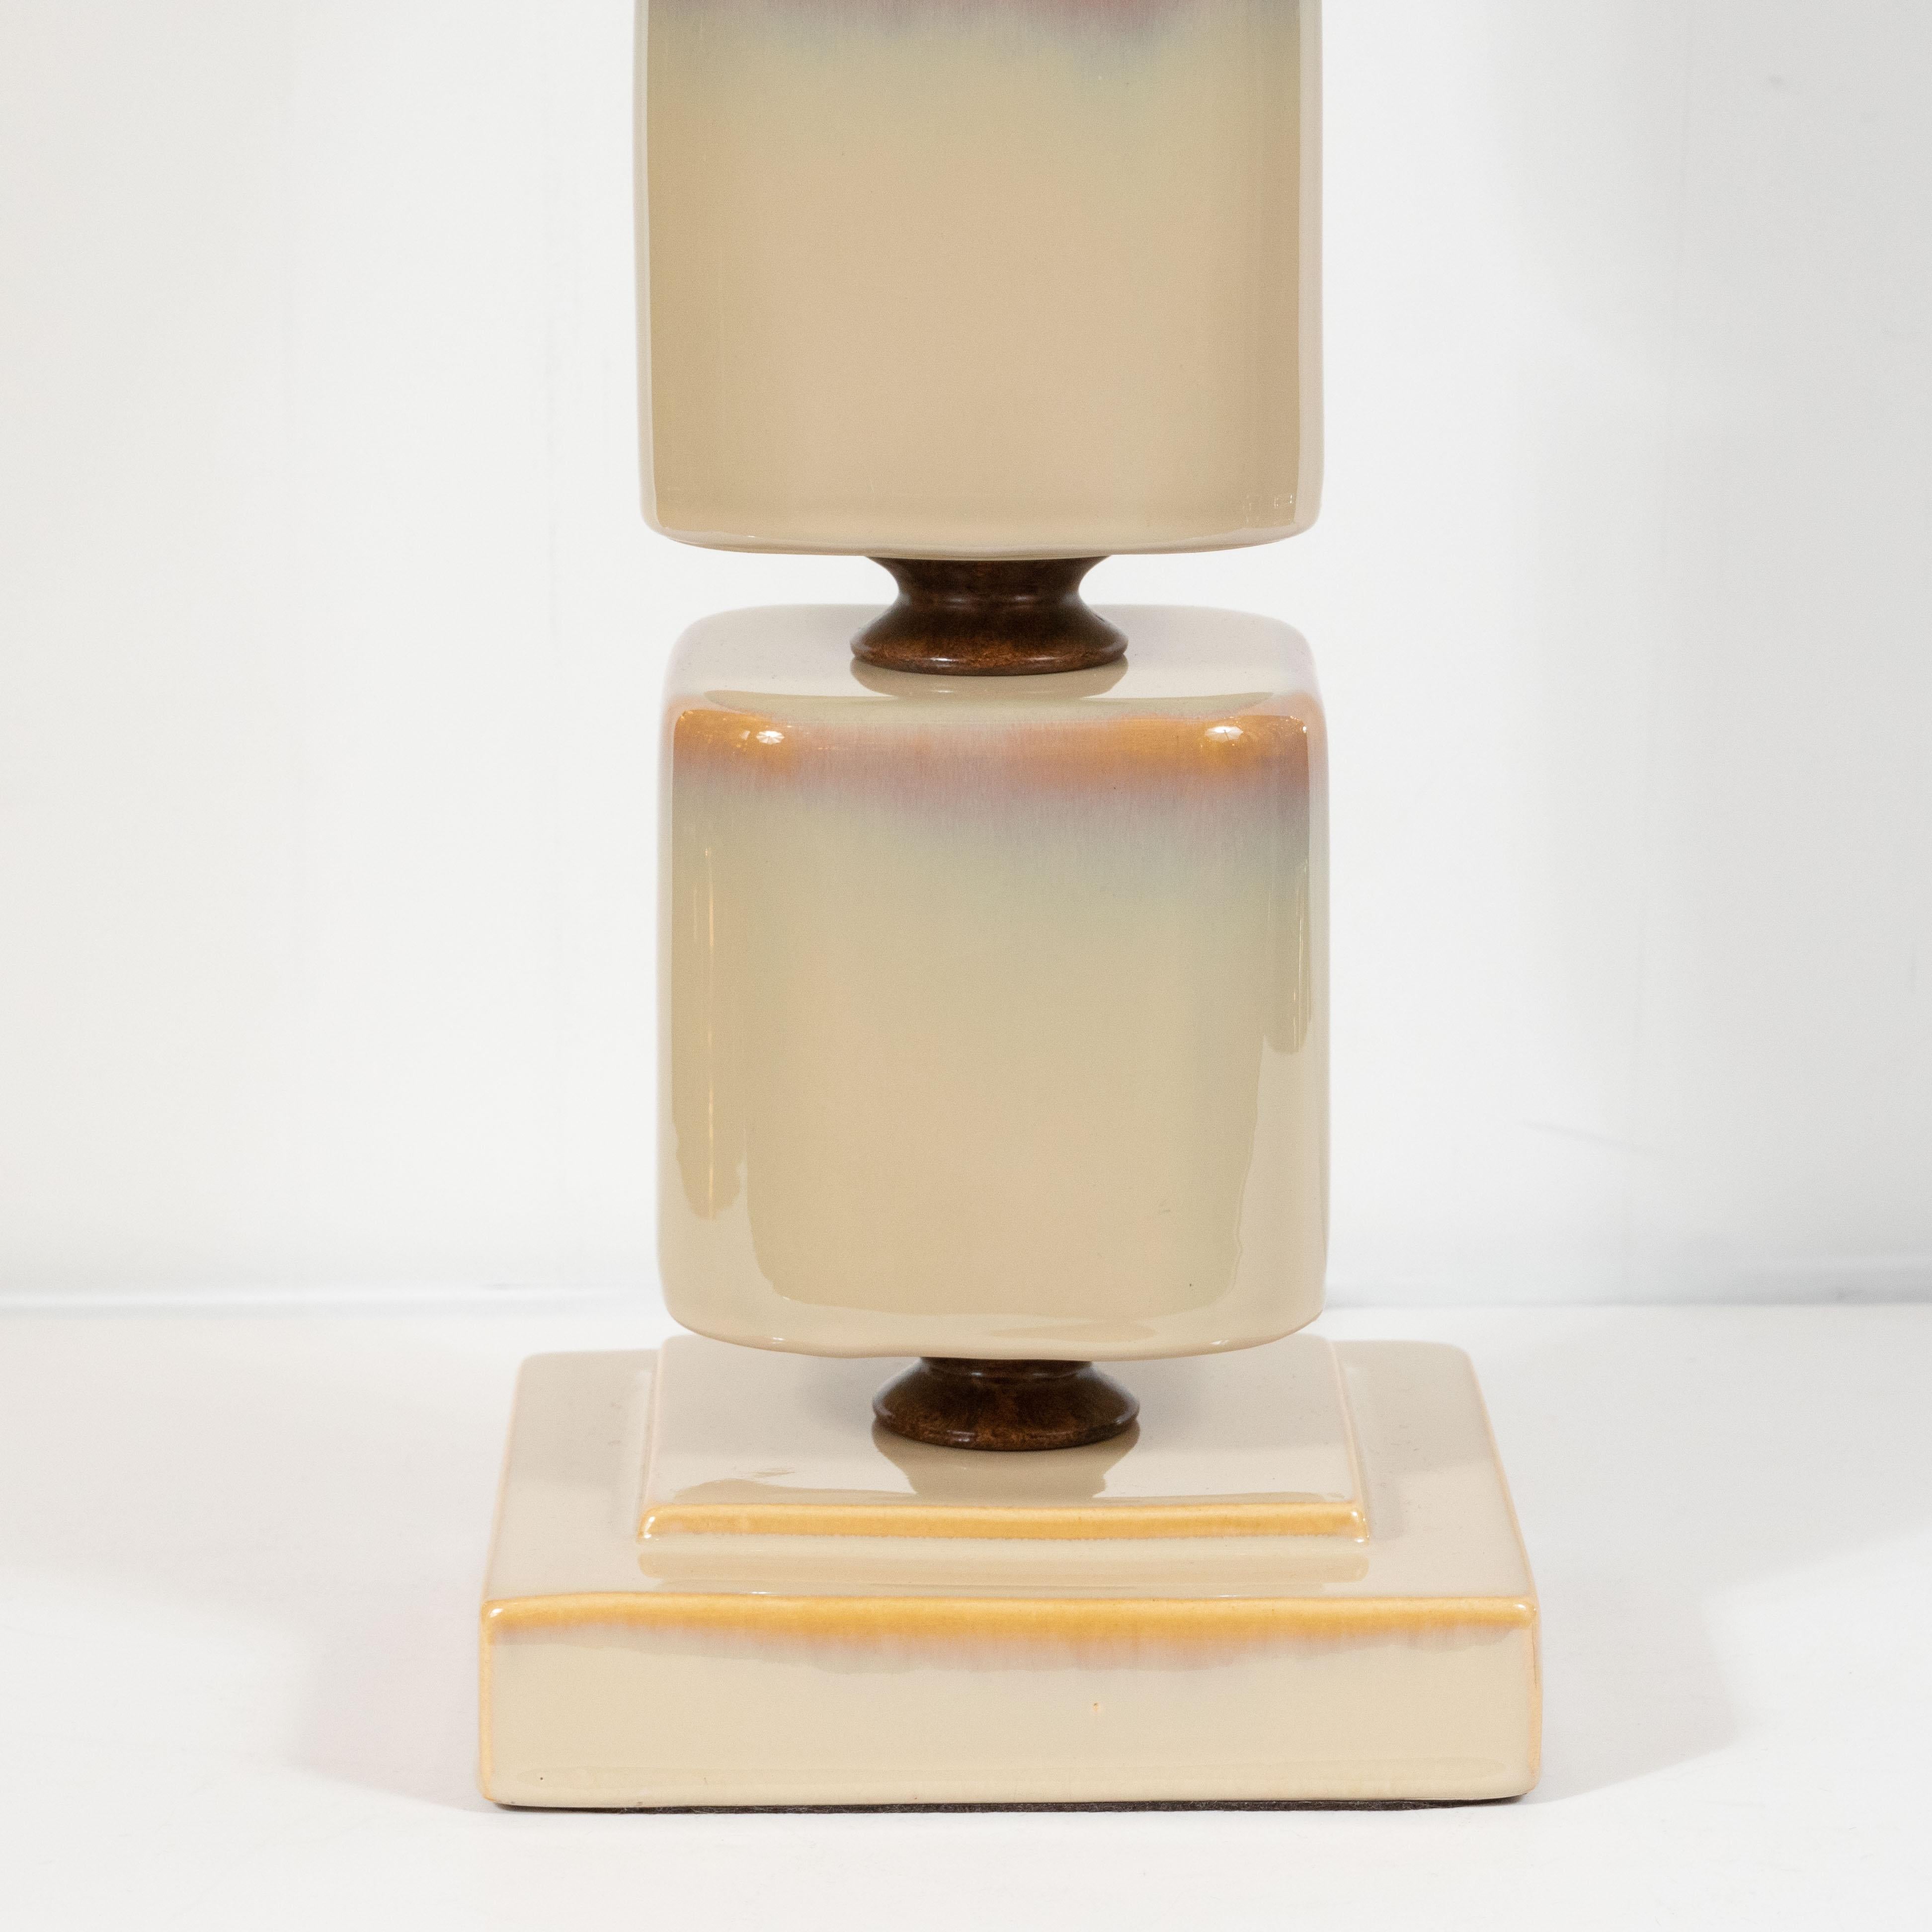 American Pair of Mid-Century Modern Ceramic Pearlescent Cube Table Lamps